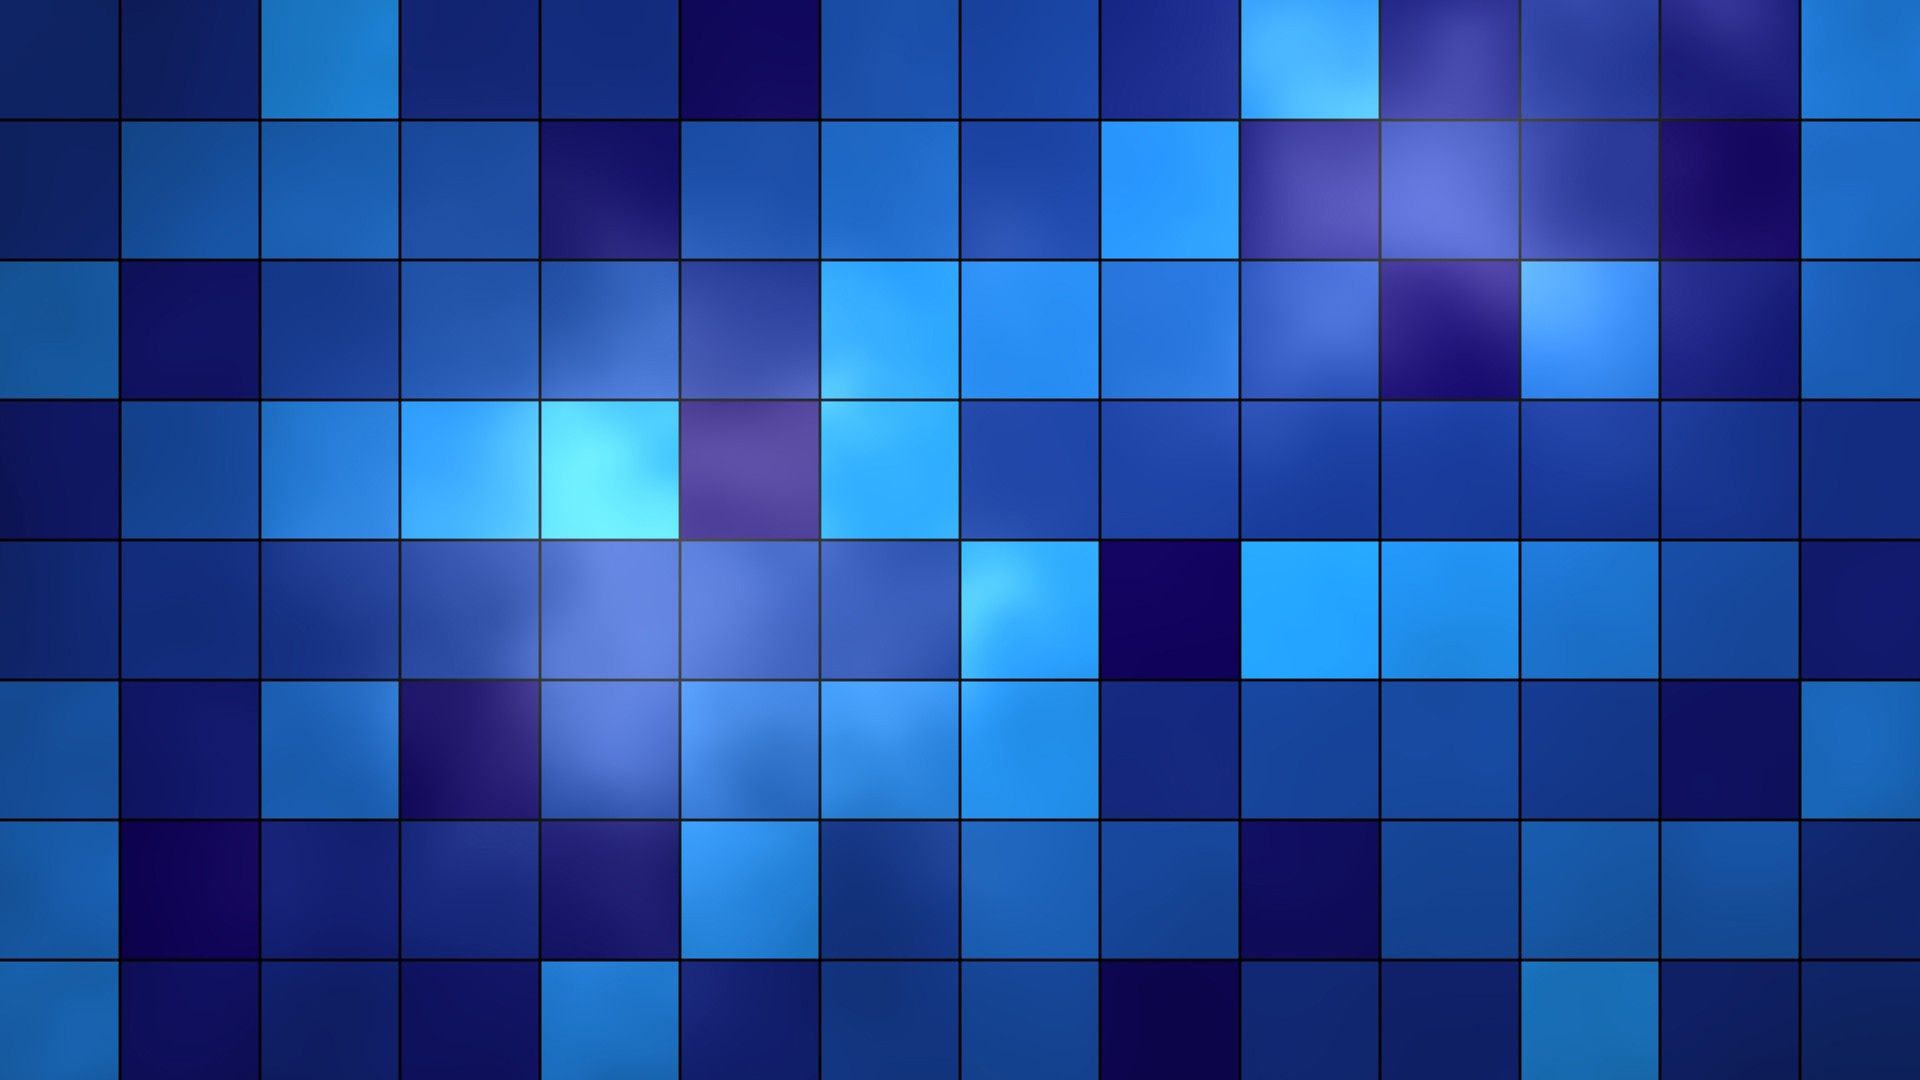 Free High Definition Blue Wallpaper For Download